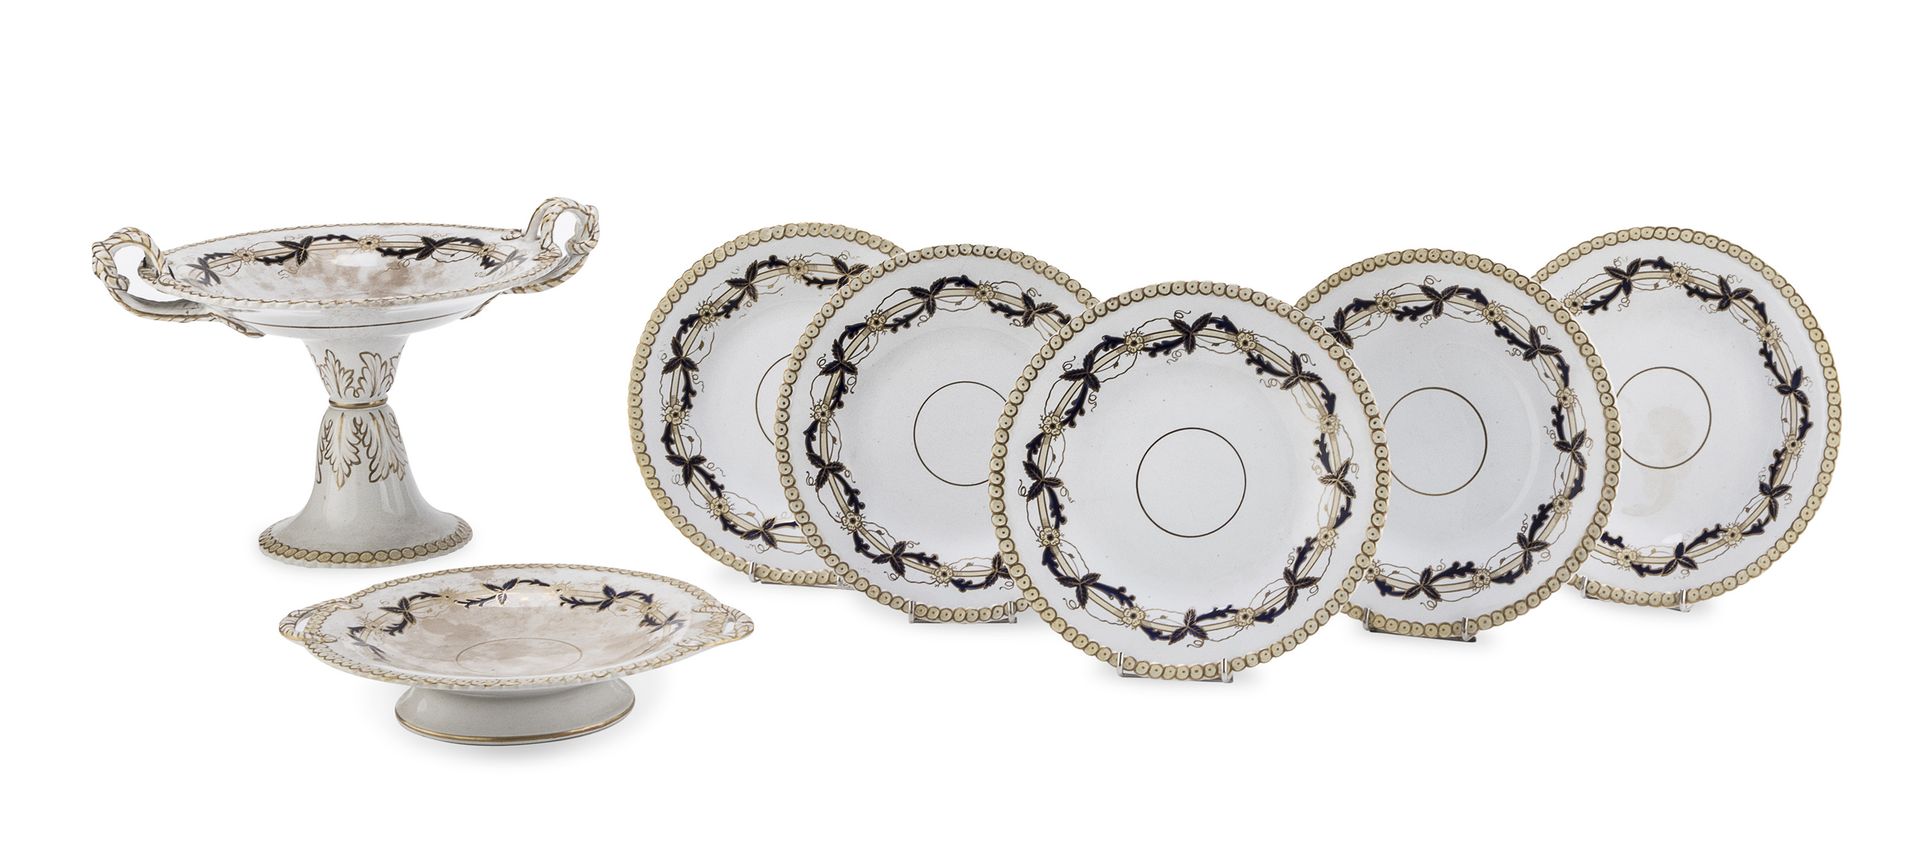 Null PAART OF AN EARTHWARE DINNER SET, ENGLAND, LATE 19th CENTURY